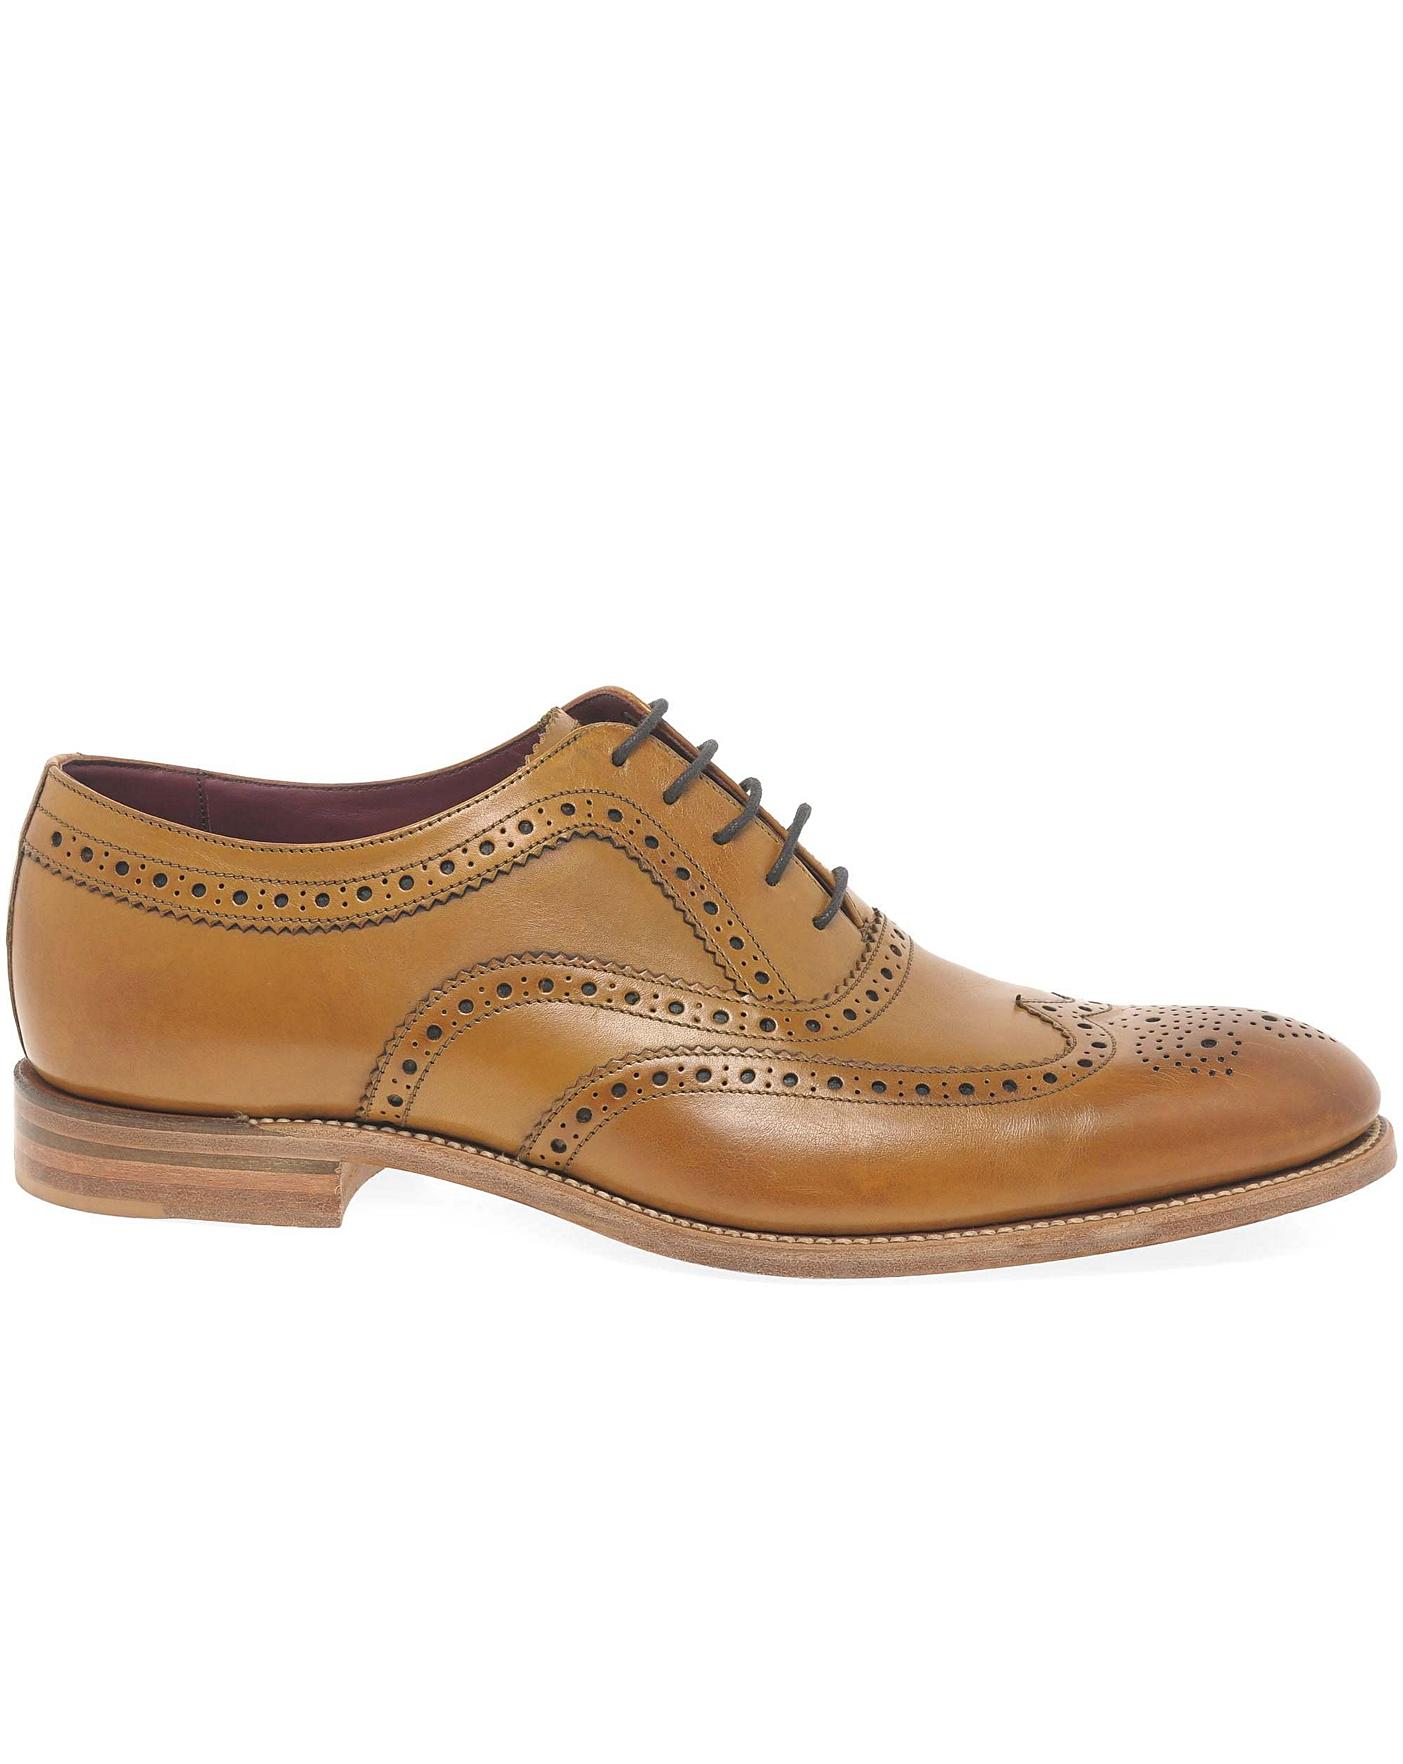 Fearnley Standard Fit Oxford Shoes